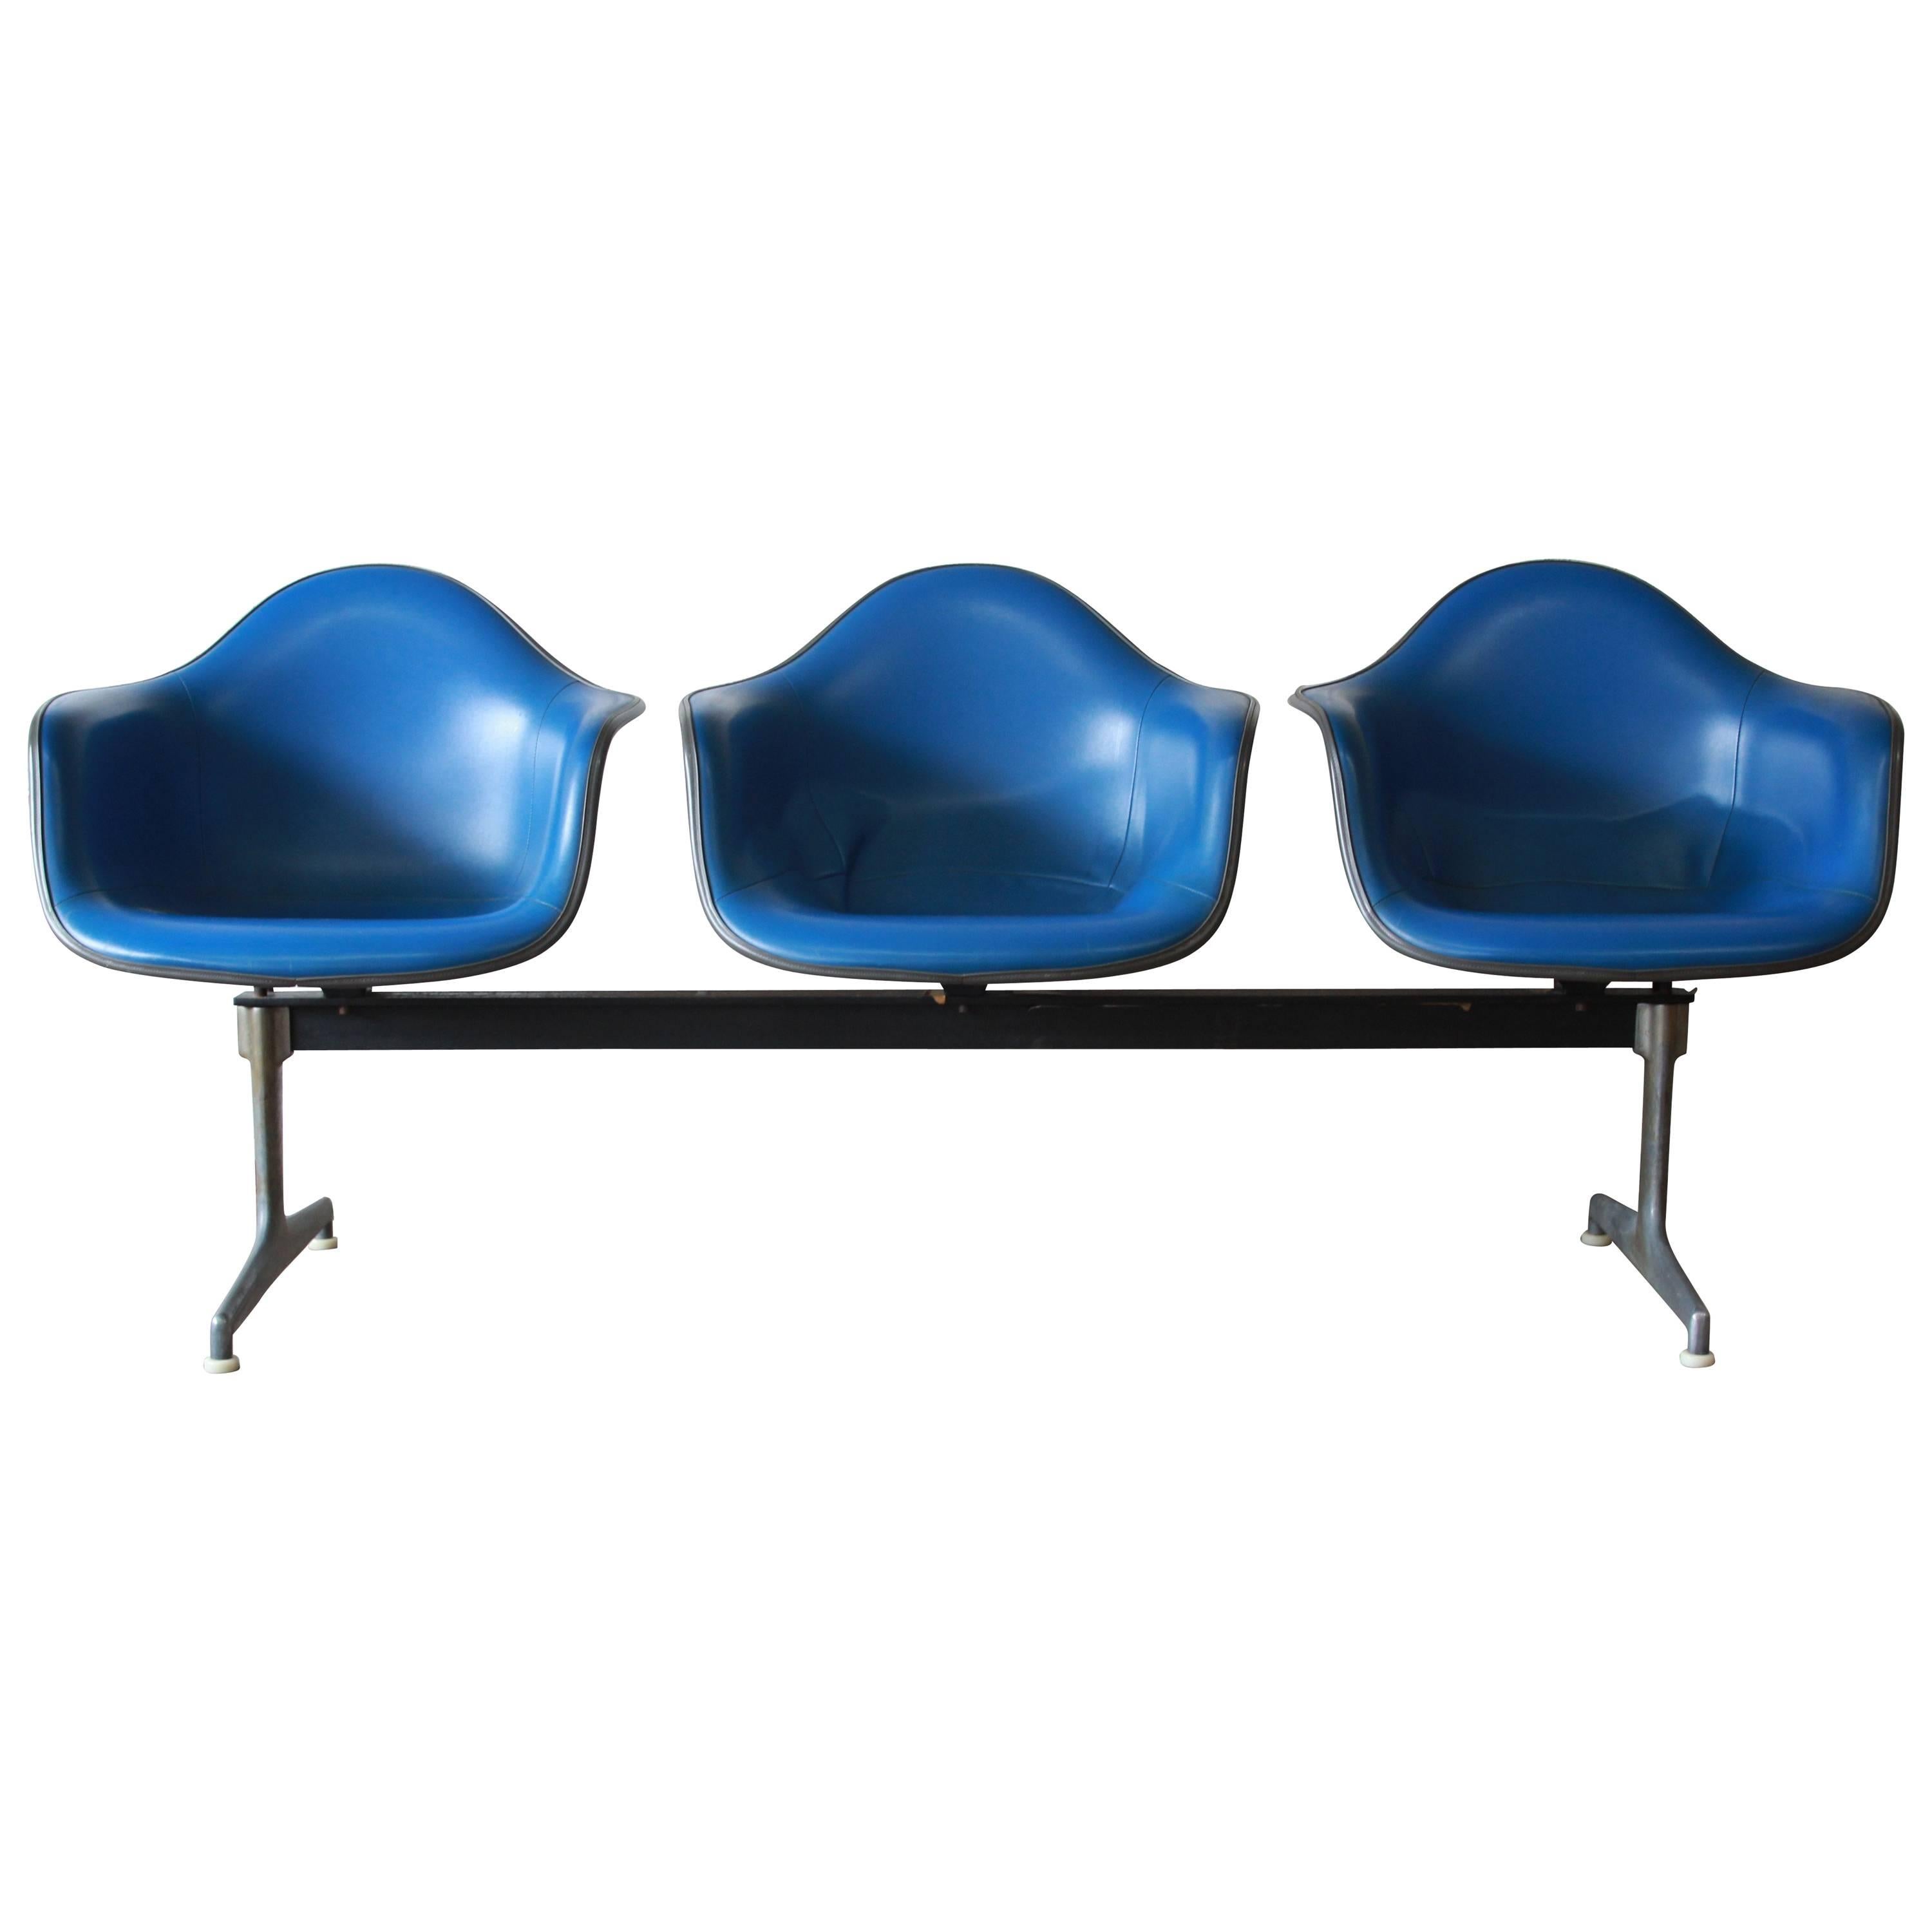 Tandem Three-Seat Shell Chairs by Charles & Ray Eames for Herman Miller